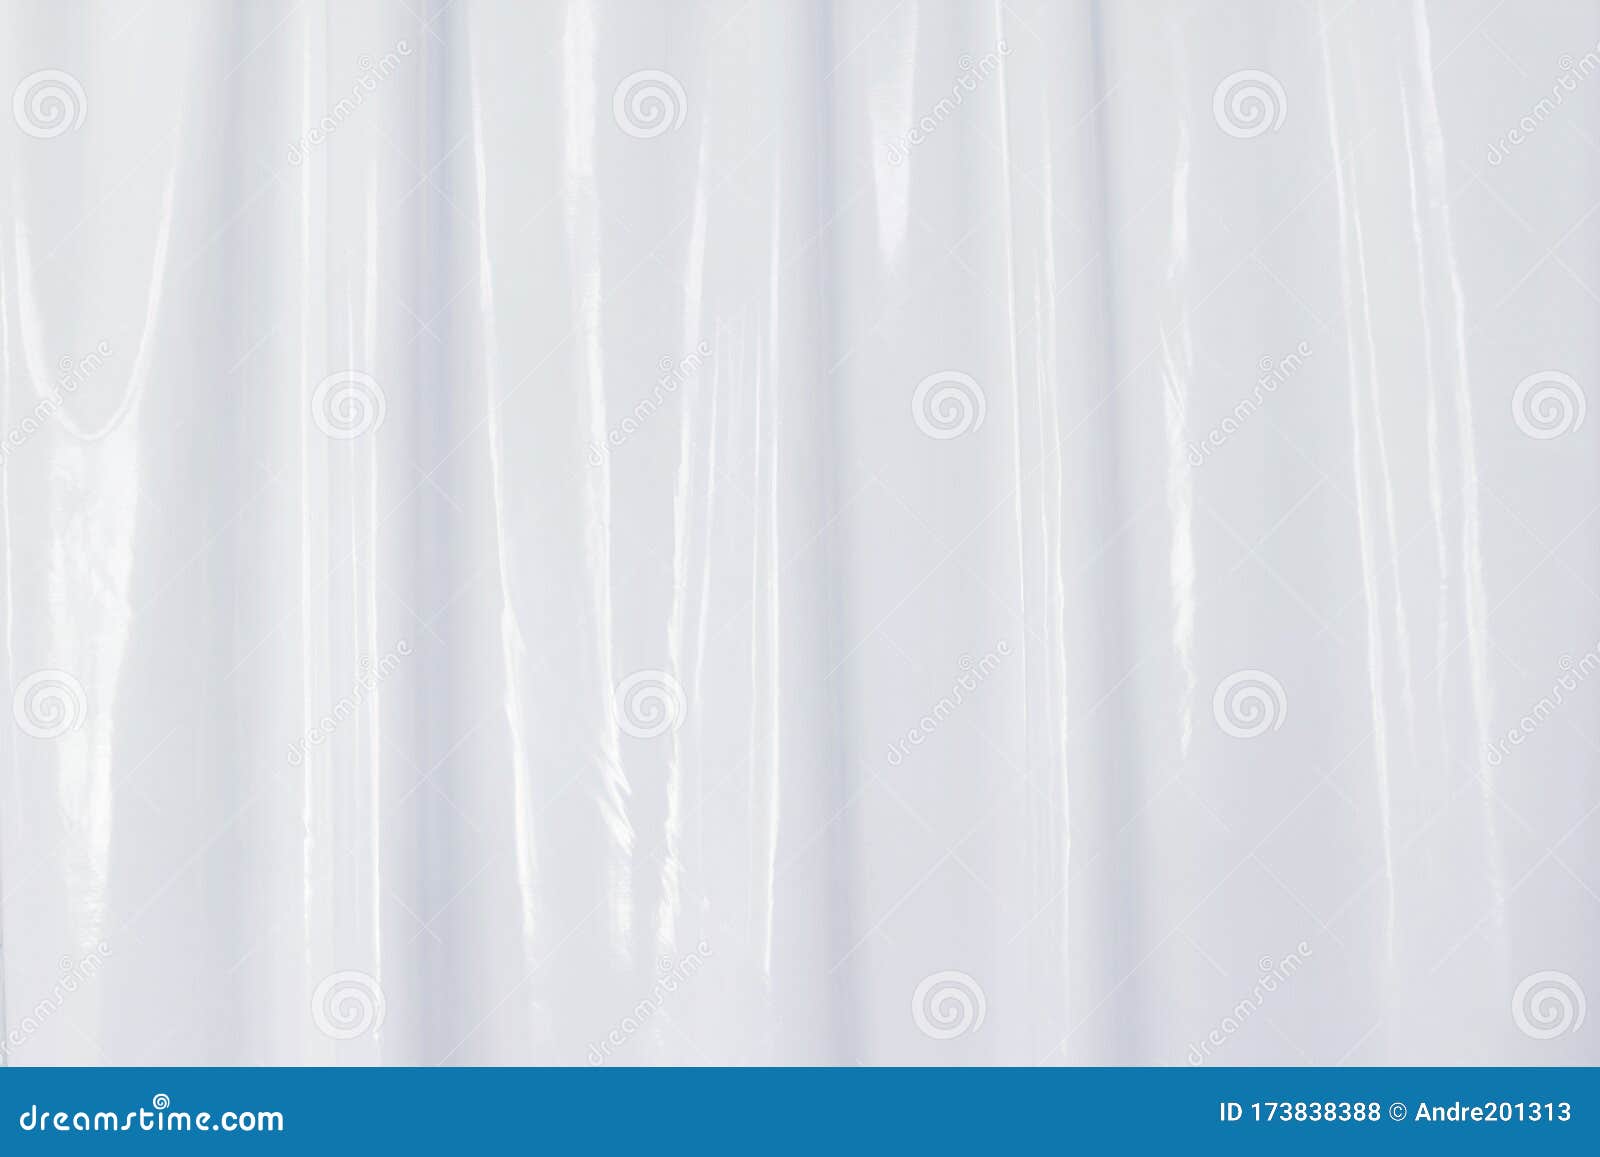 White Smooth Glossy Abstract Elegant Liquid Background. Latex, Lacquer,  Varnish Wave. Stock Photo - Image of latex, decoration: 173838388